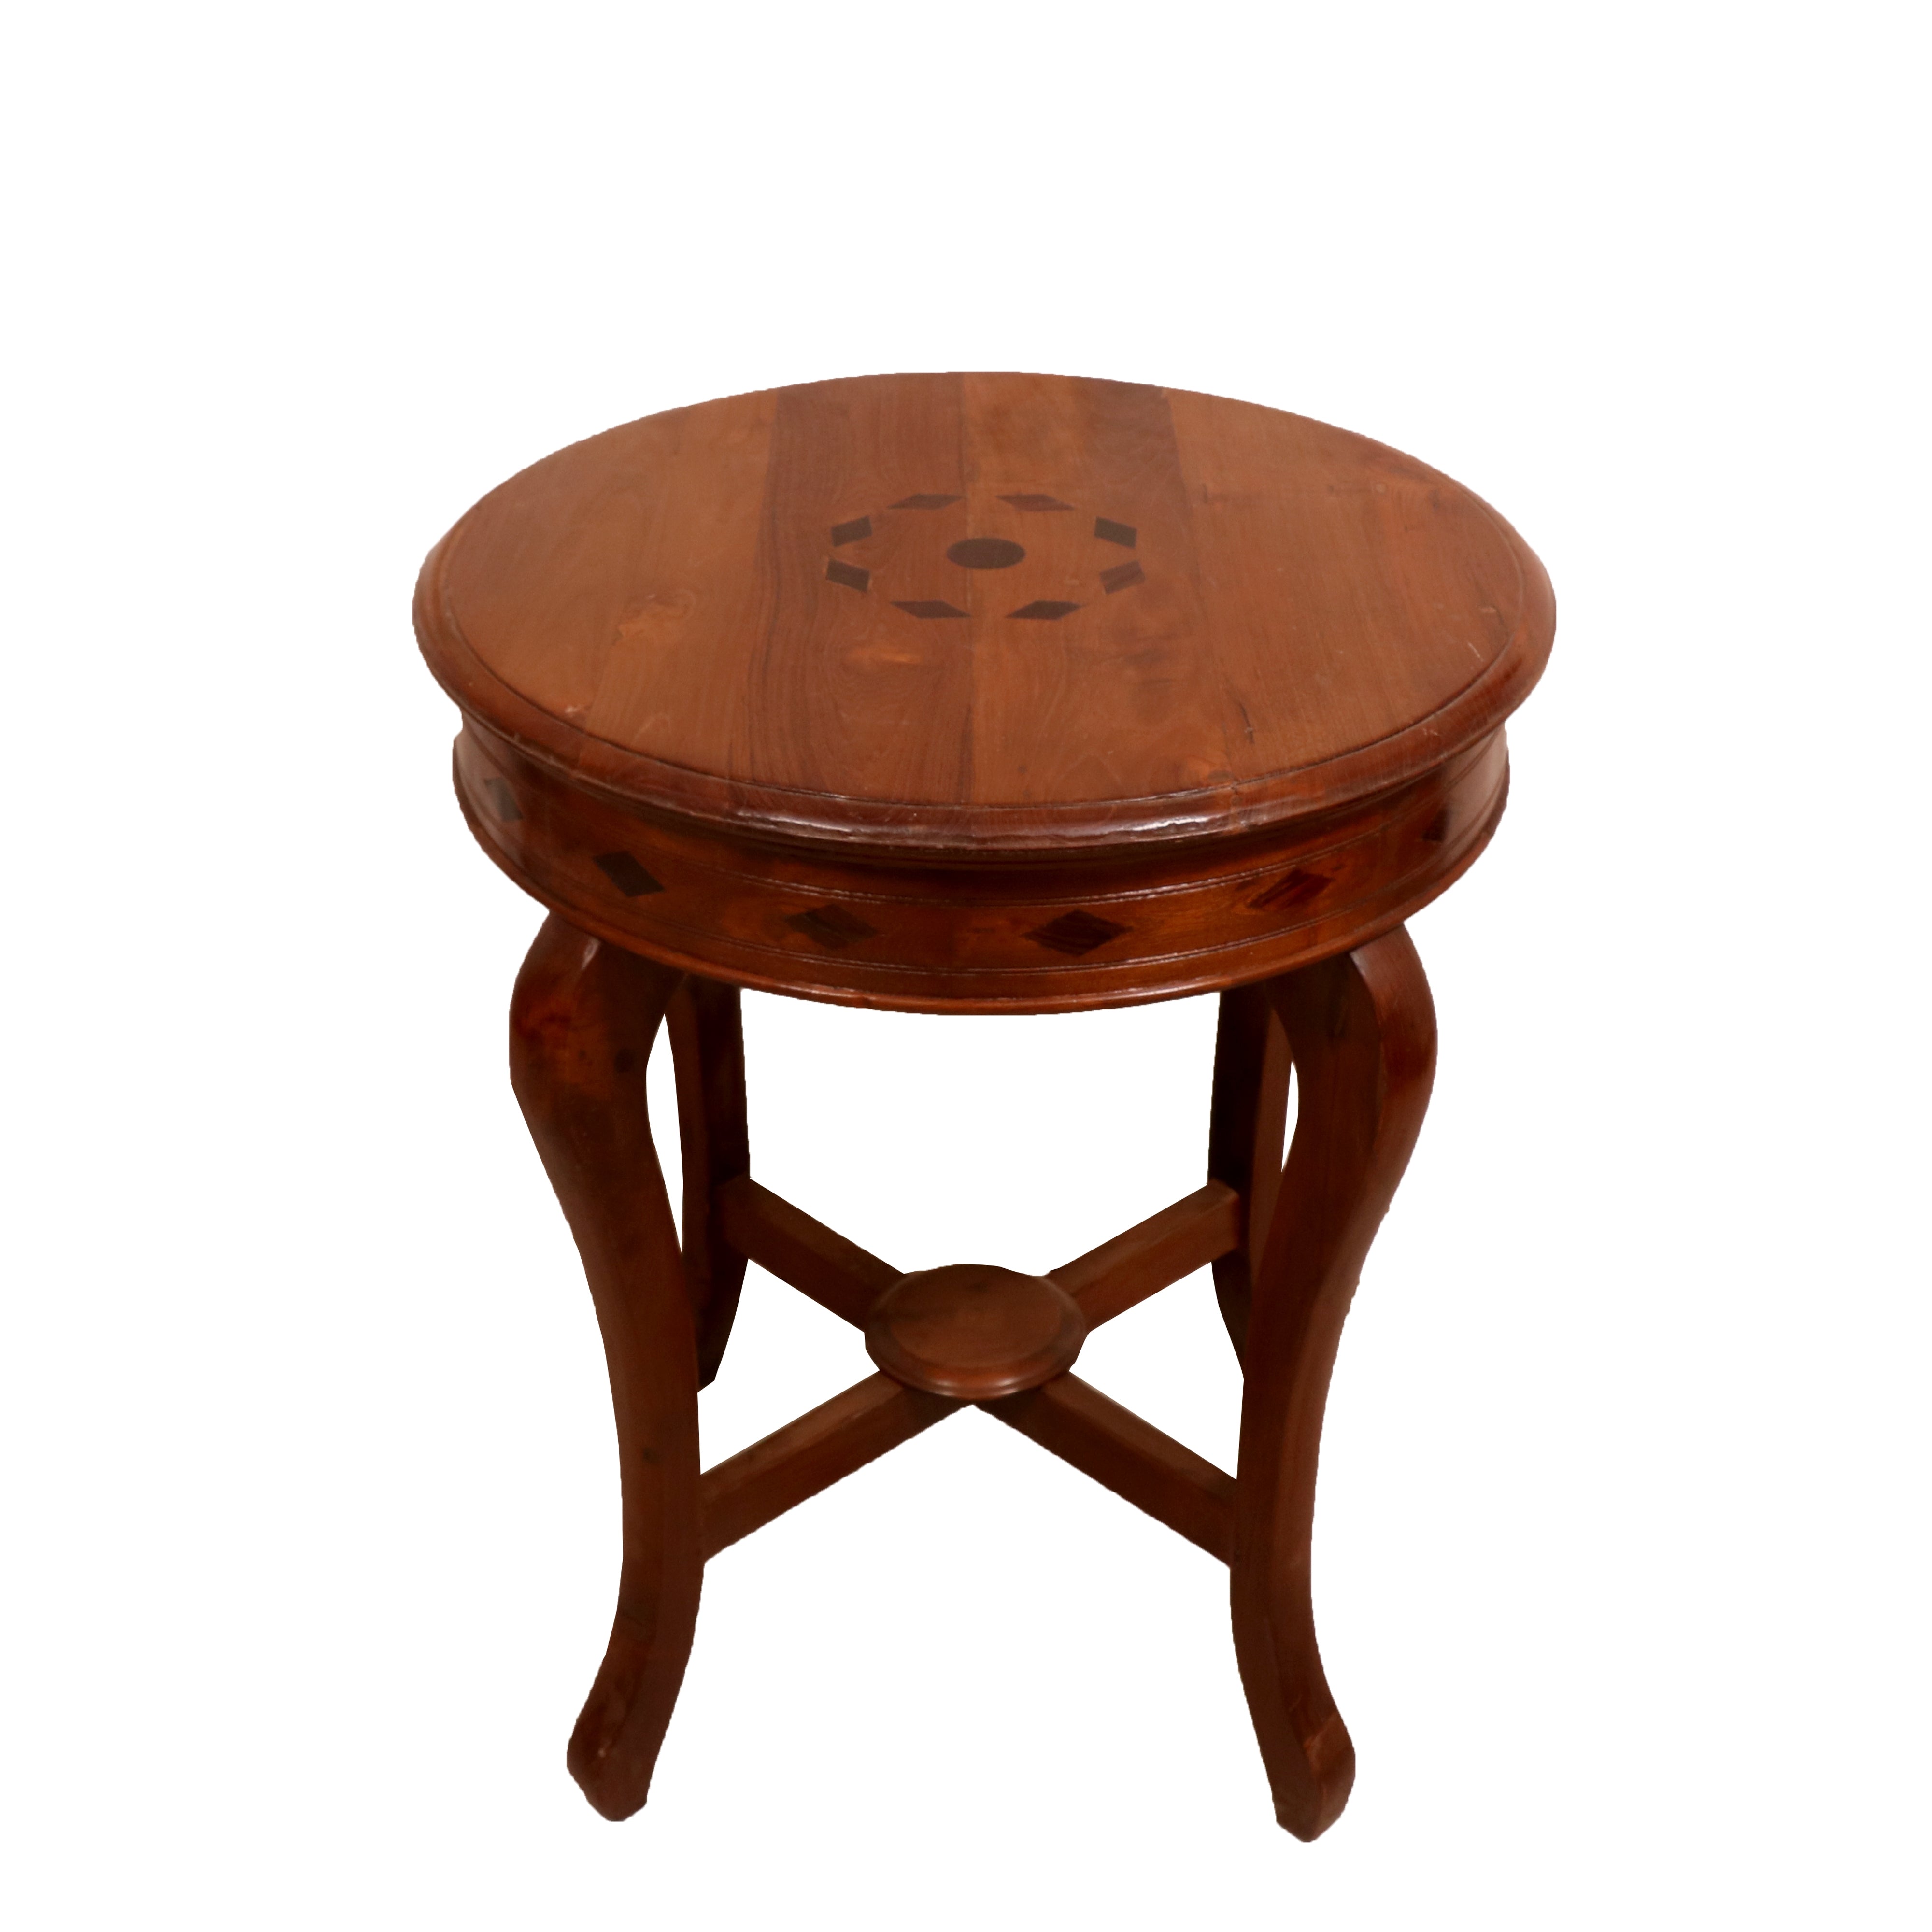 Diamond Inlay Top Round End Table End Table